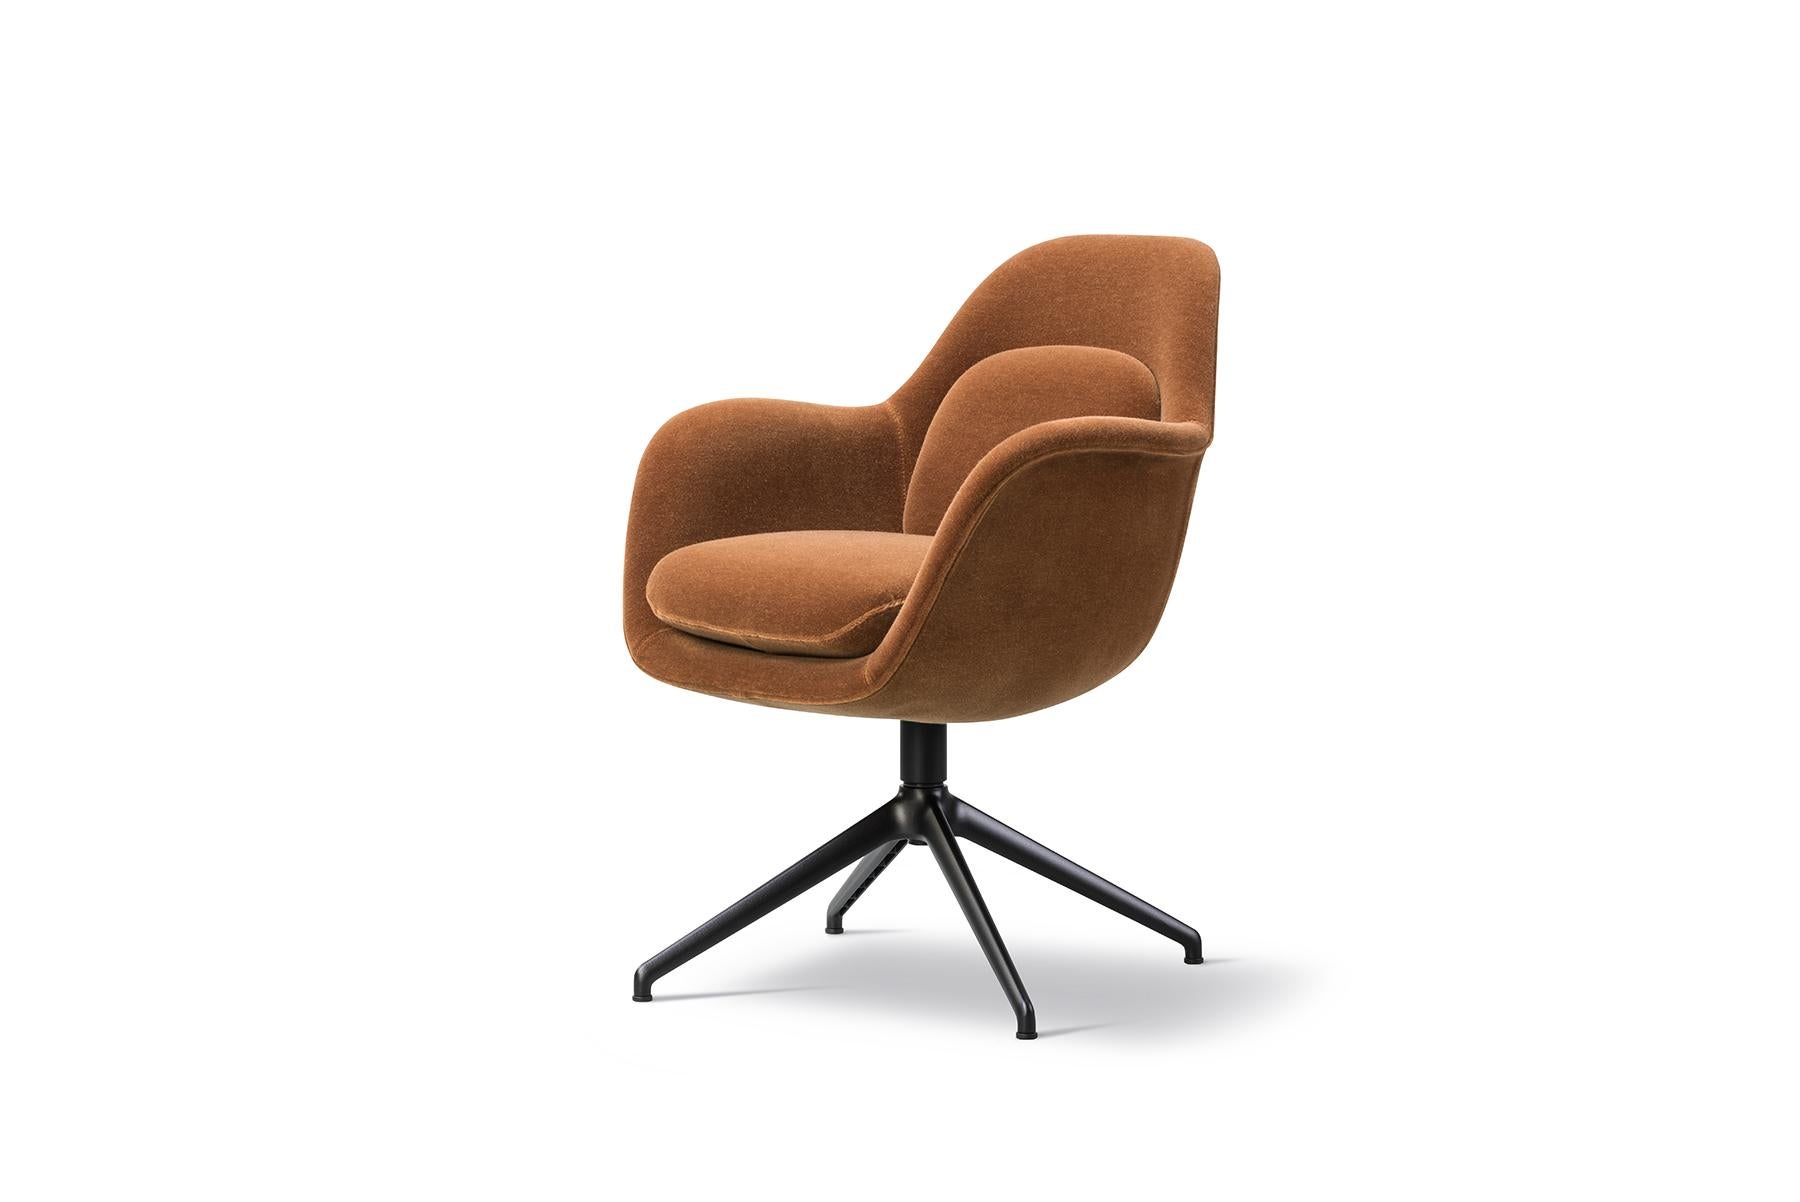 Space Copenhagen Swoon dining chair, swivel base is the smallest upright version of Swoon, is a size that’s even more compact. With its singular shell merging the armrests, seat and back, in addition to the supportive, soft cushions and choice of